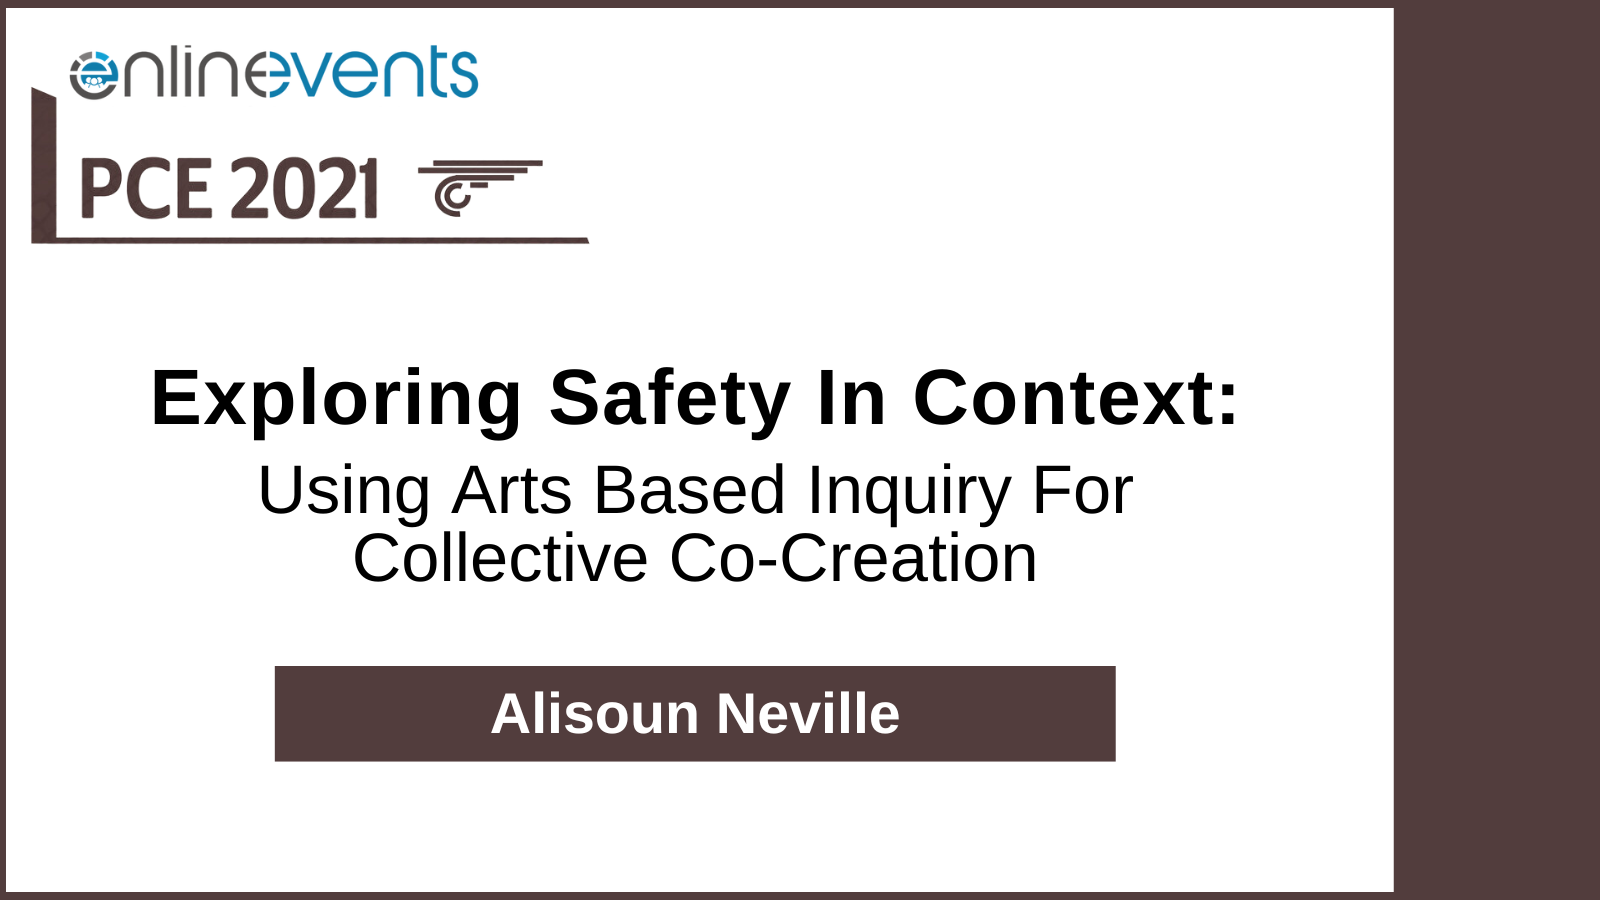 Exploring Safety In Context Using Arts Based Inquiry For Collective Co-Creation – Alisoun Neville